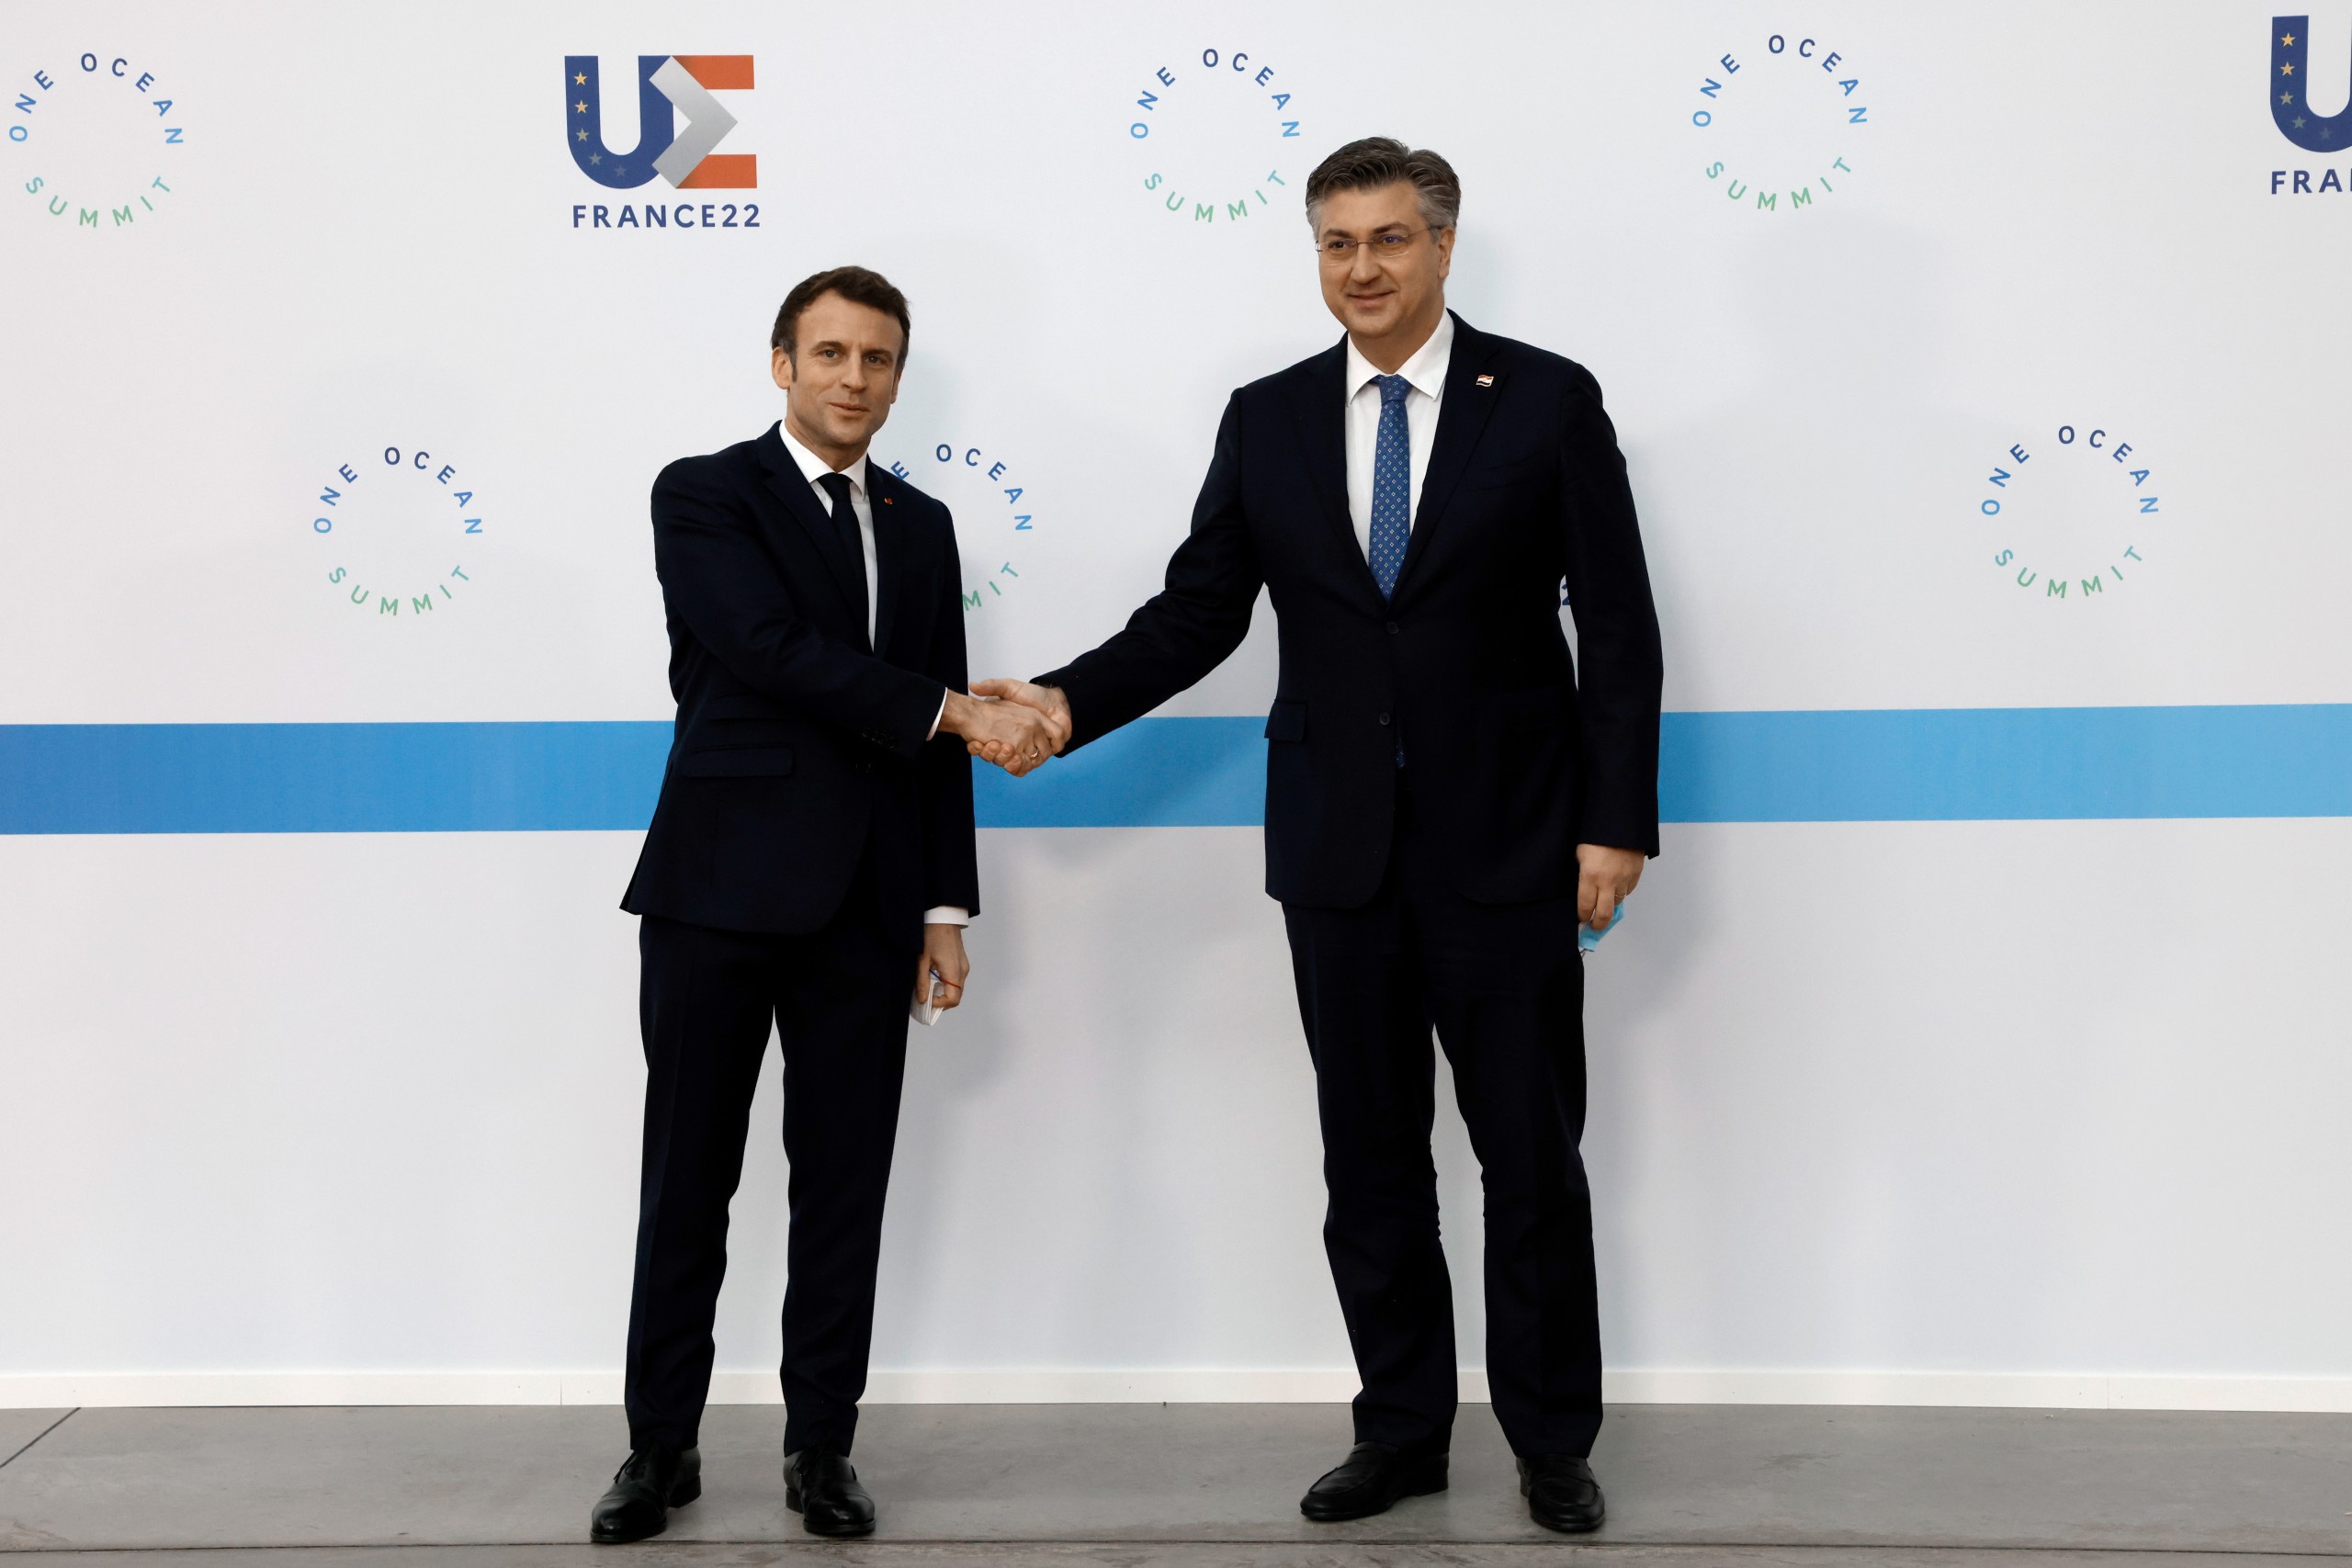 epa09746092 France's President Emmanuel Macron (L) welcomes Croatia's Prime Minister Andrej Plenkovic (R) before the High Level Segment session of the One Ocean Summit, in Brest, France, 11 February 2022. The session seeks to raise the international community's ambitions to protect sealife, cut plastic pollution and tackle the impact of climate change.  EPA/LUDOVIC MARIN / POOL  MAXPPP OUT